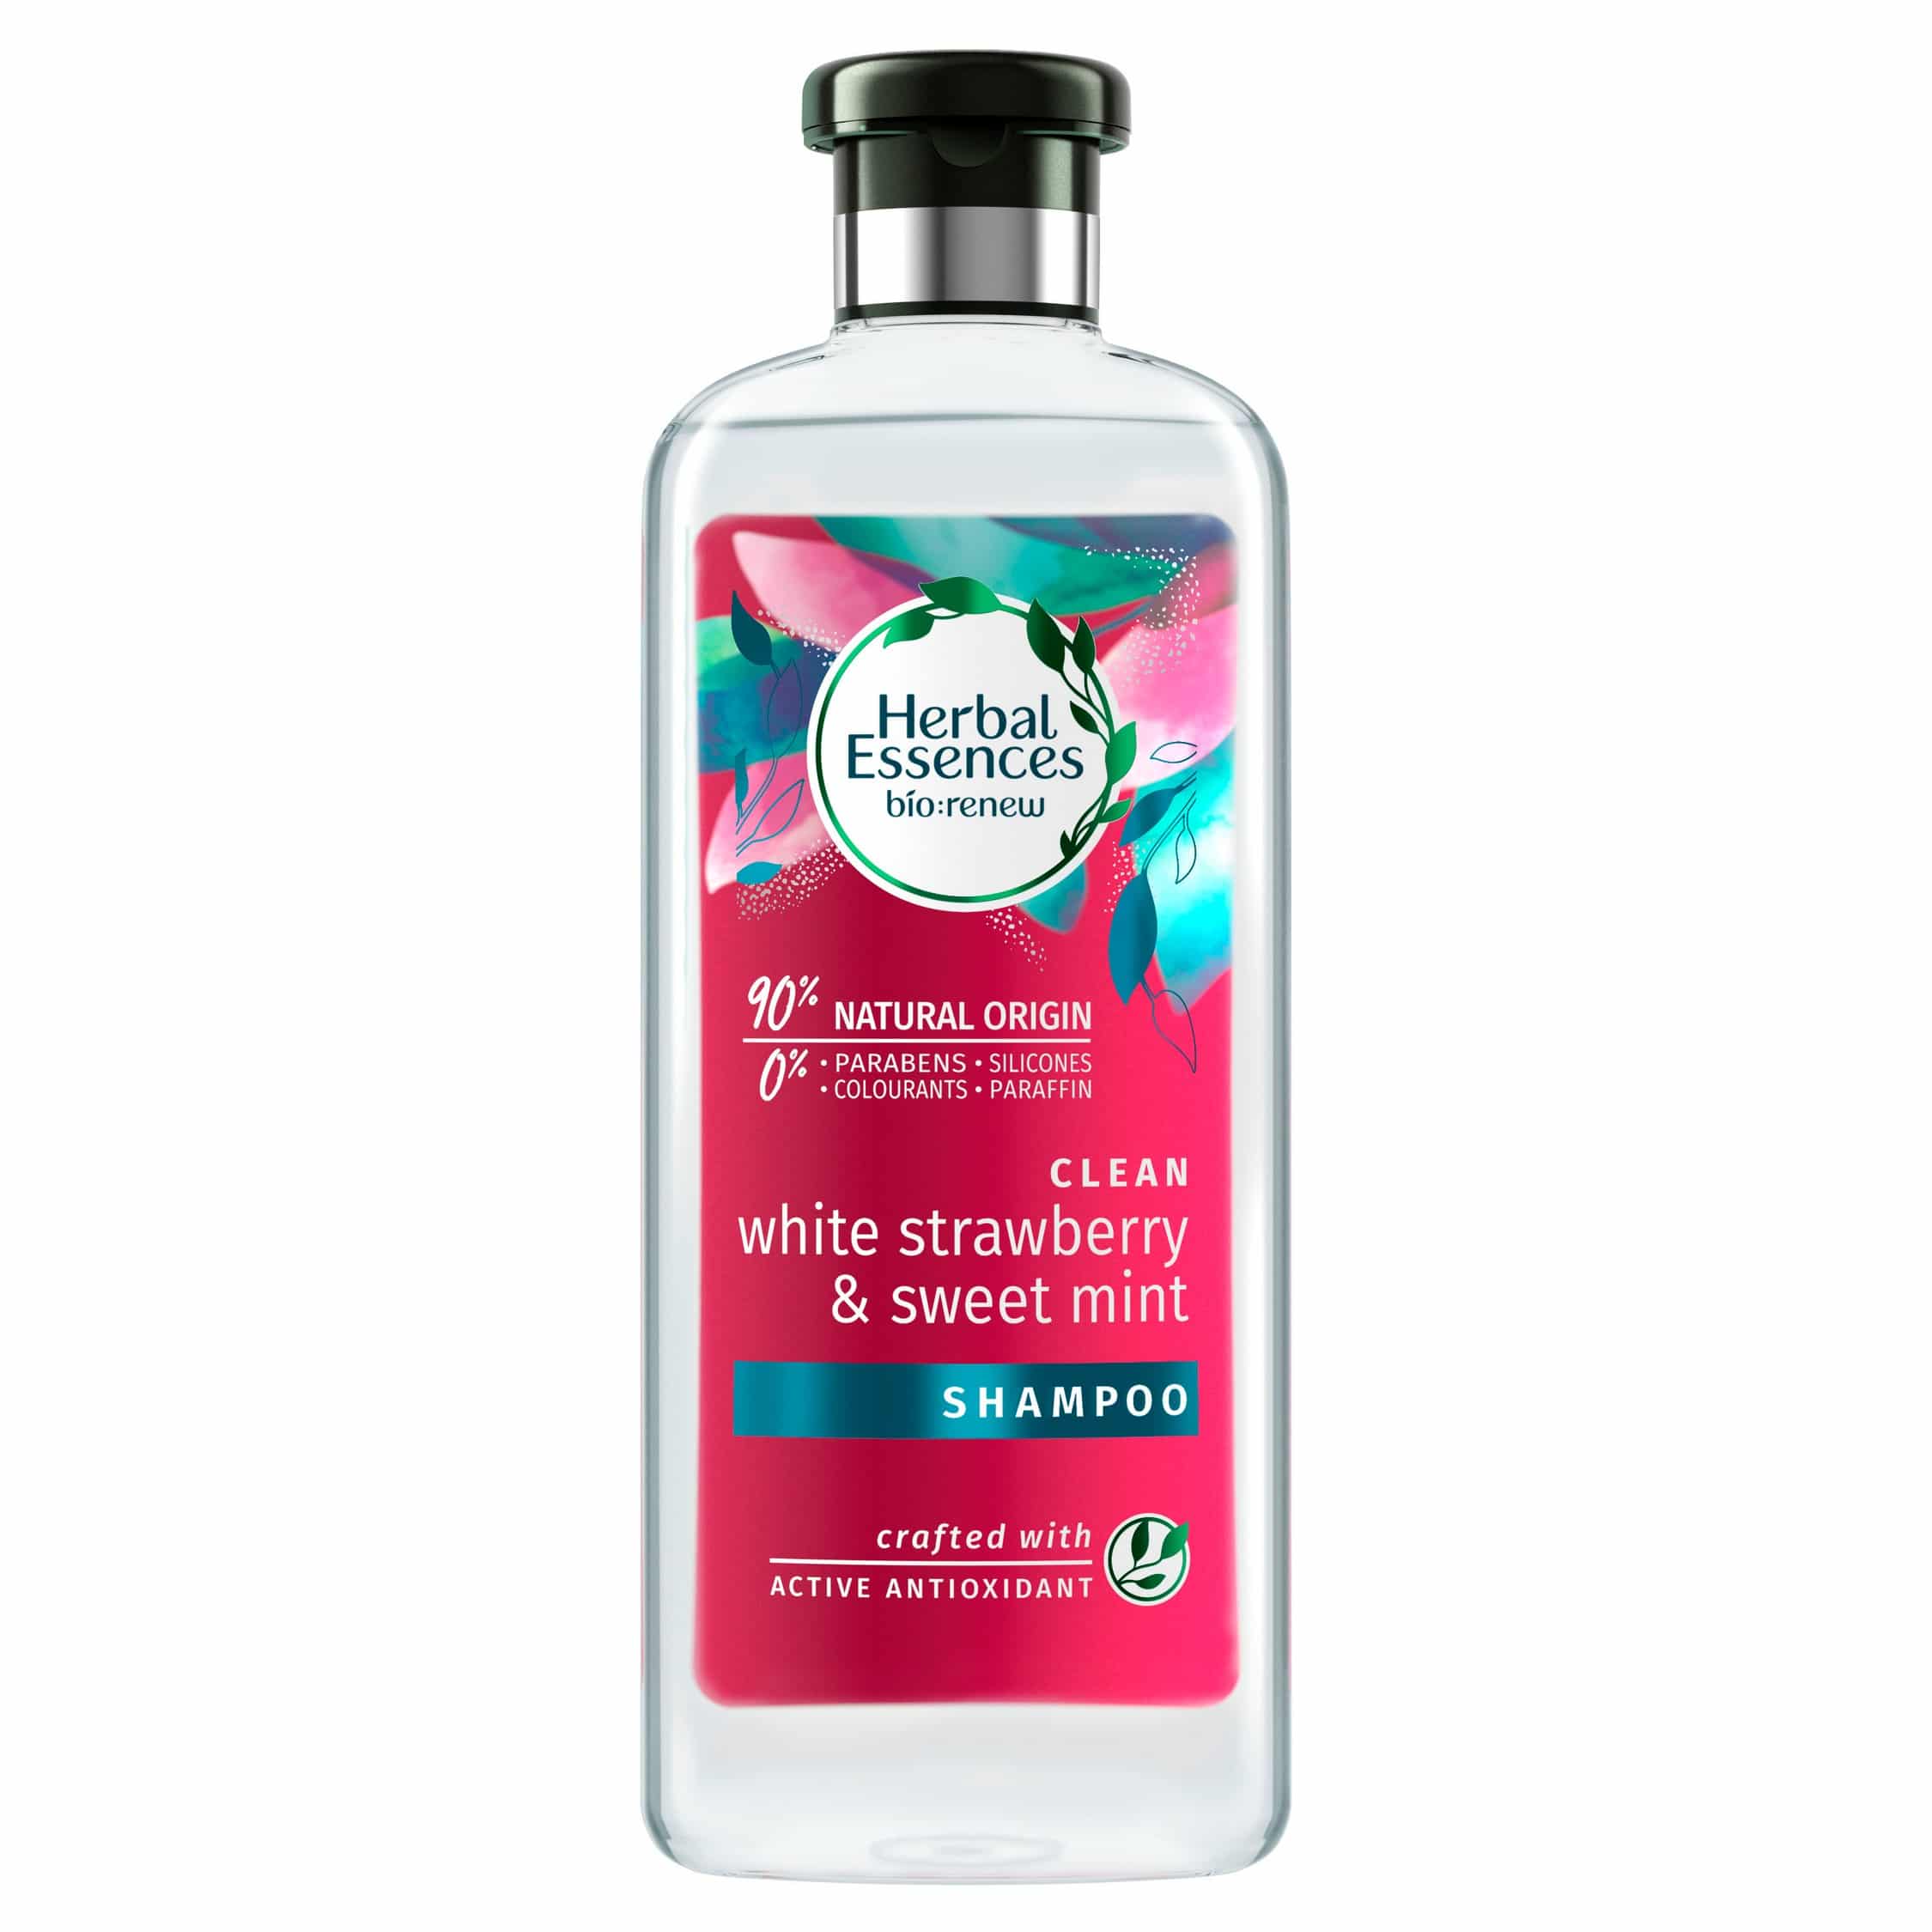 szampon herbal essences white strawberry and mint review